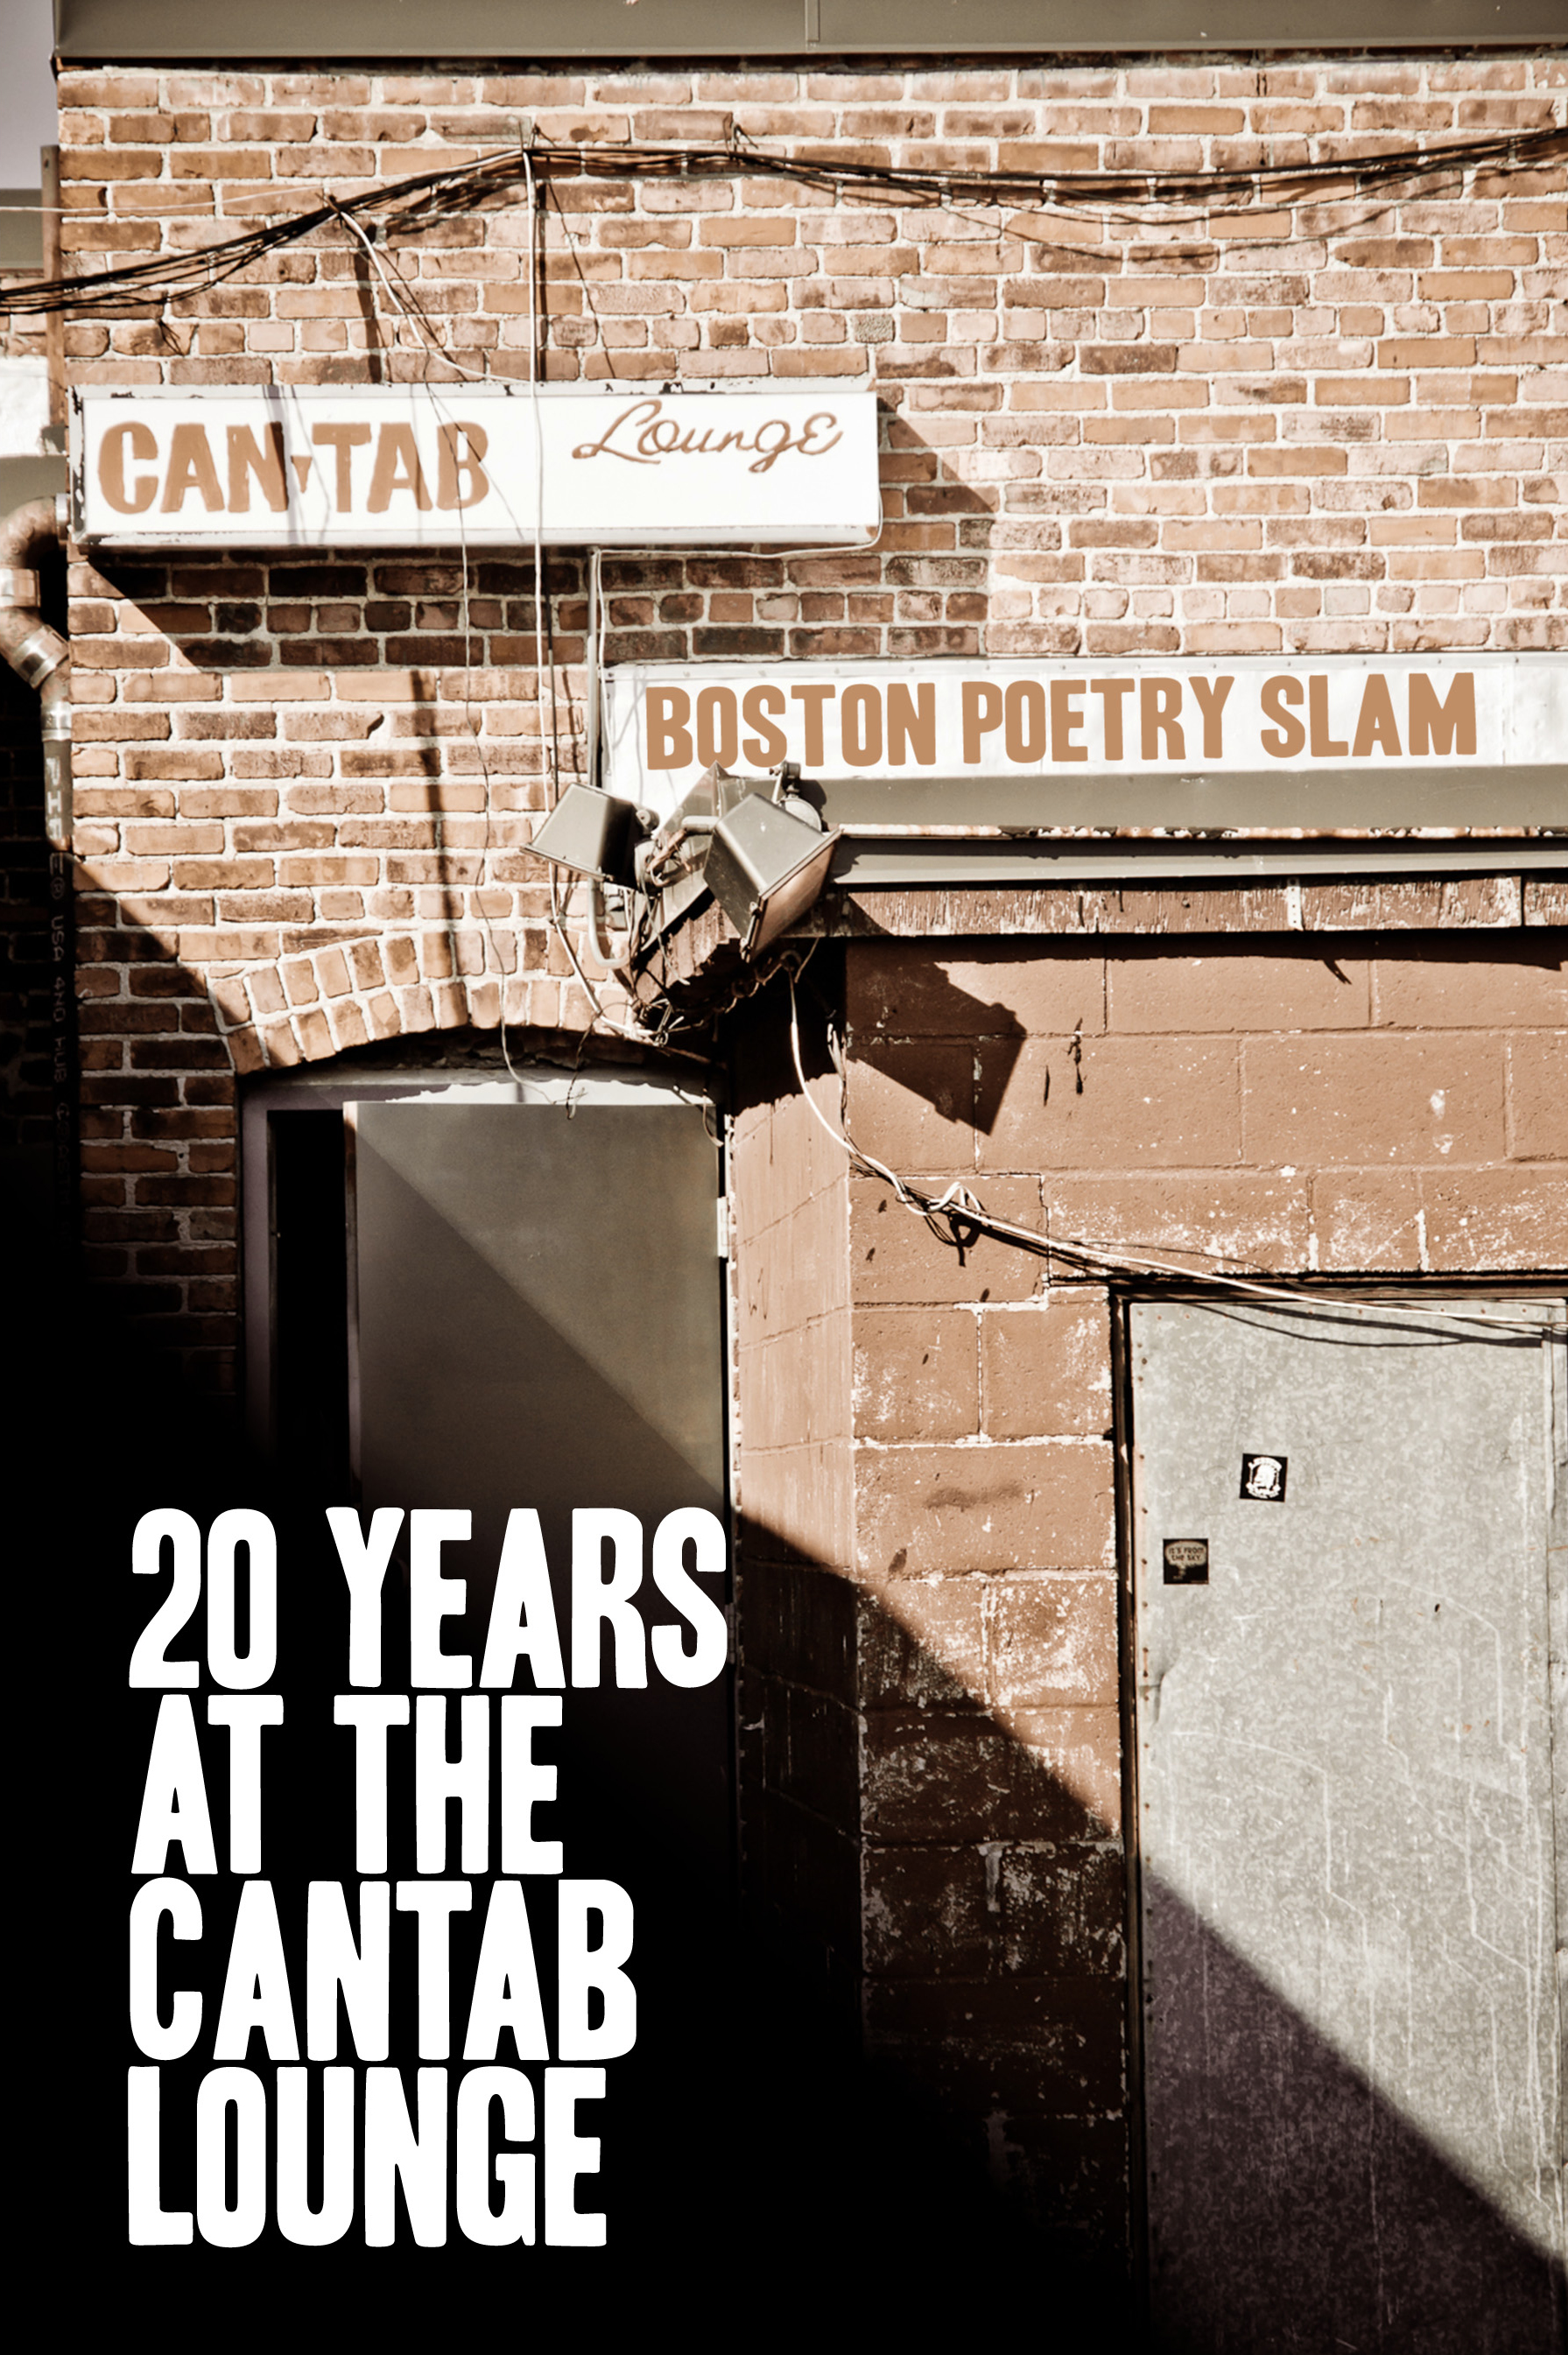 Boston Poetry Slam: 20 Years at the Cantab Lounge